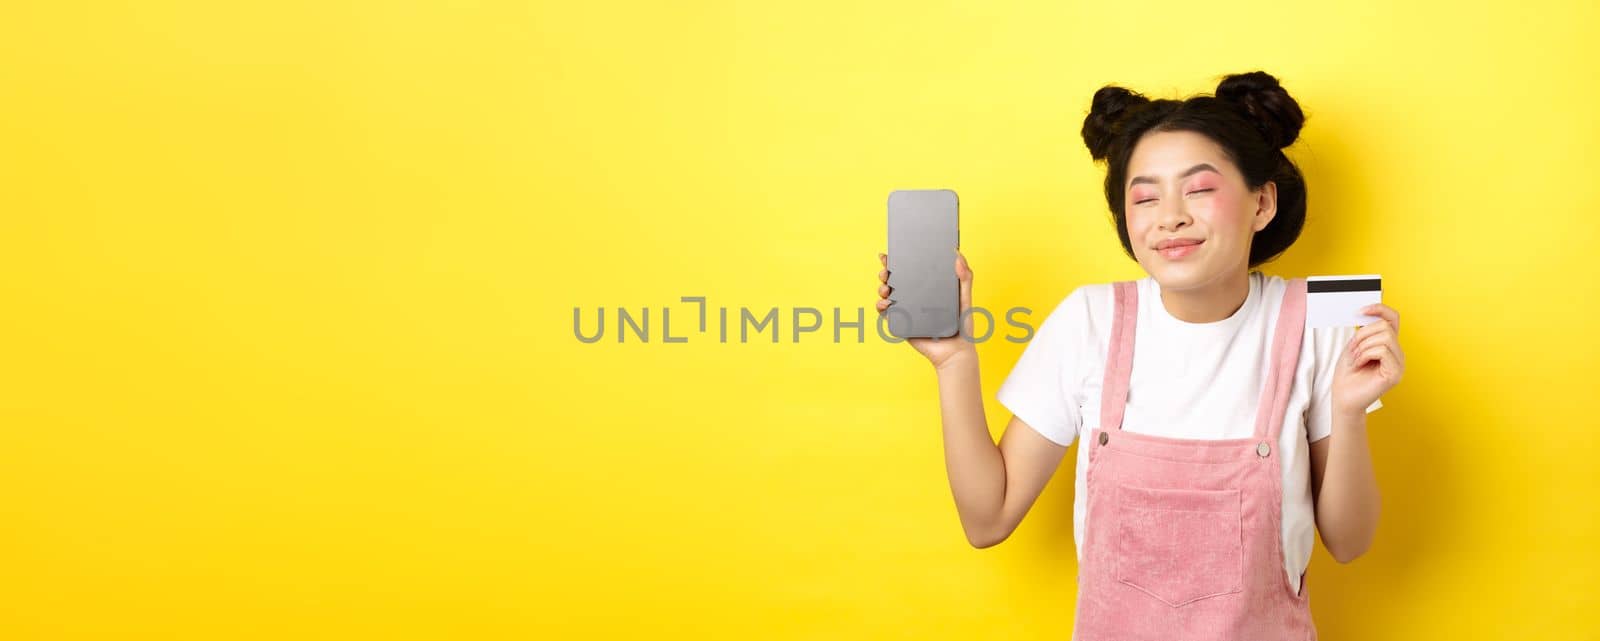 Online shopping concept. Happy asian girl showing empty smartphone screen and credit card, paying contactless, standing on yellow background.